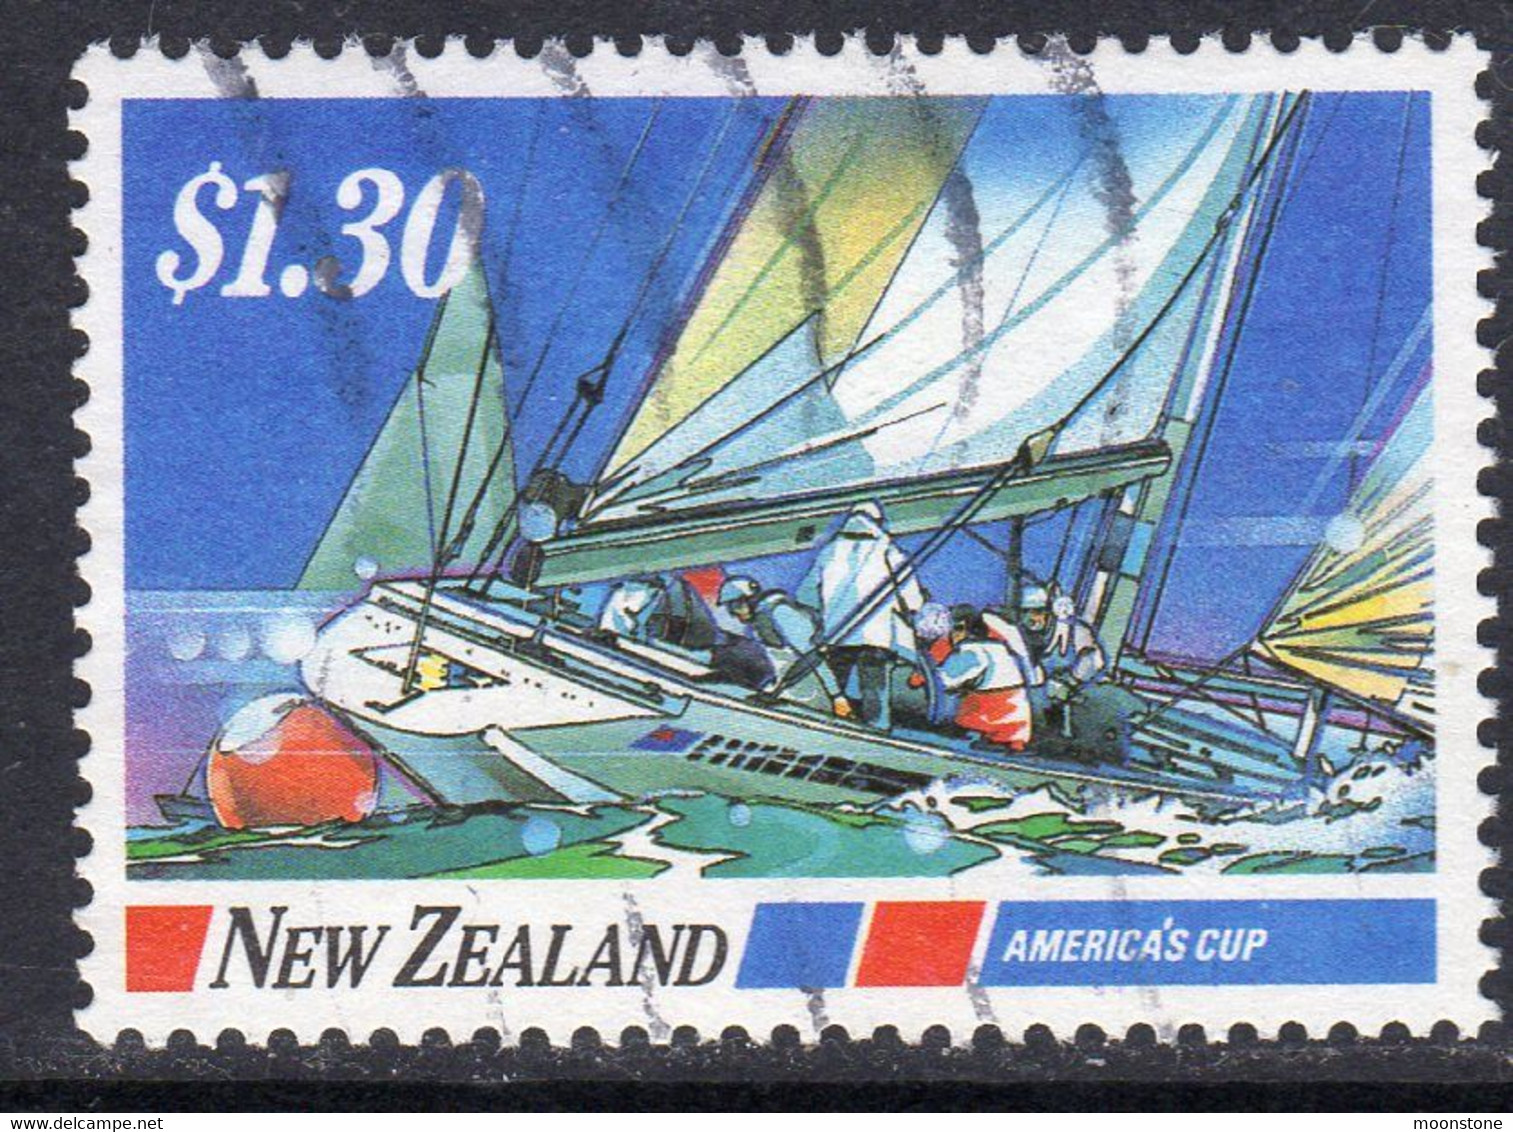 New Zealand 1987 Yachting $1.80 Value, Used, SG 1420 - Usados